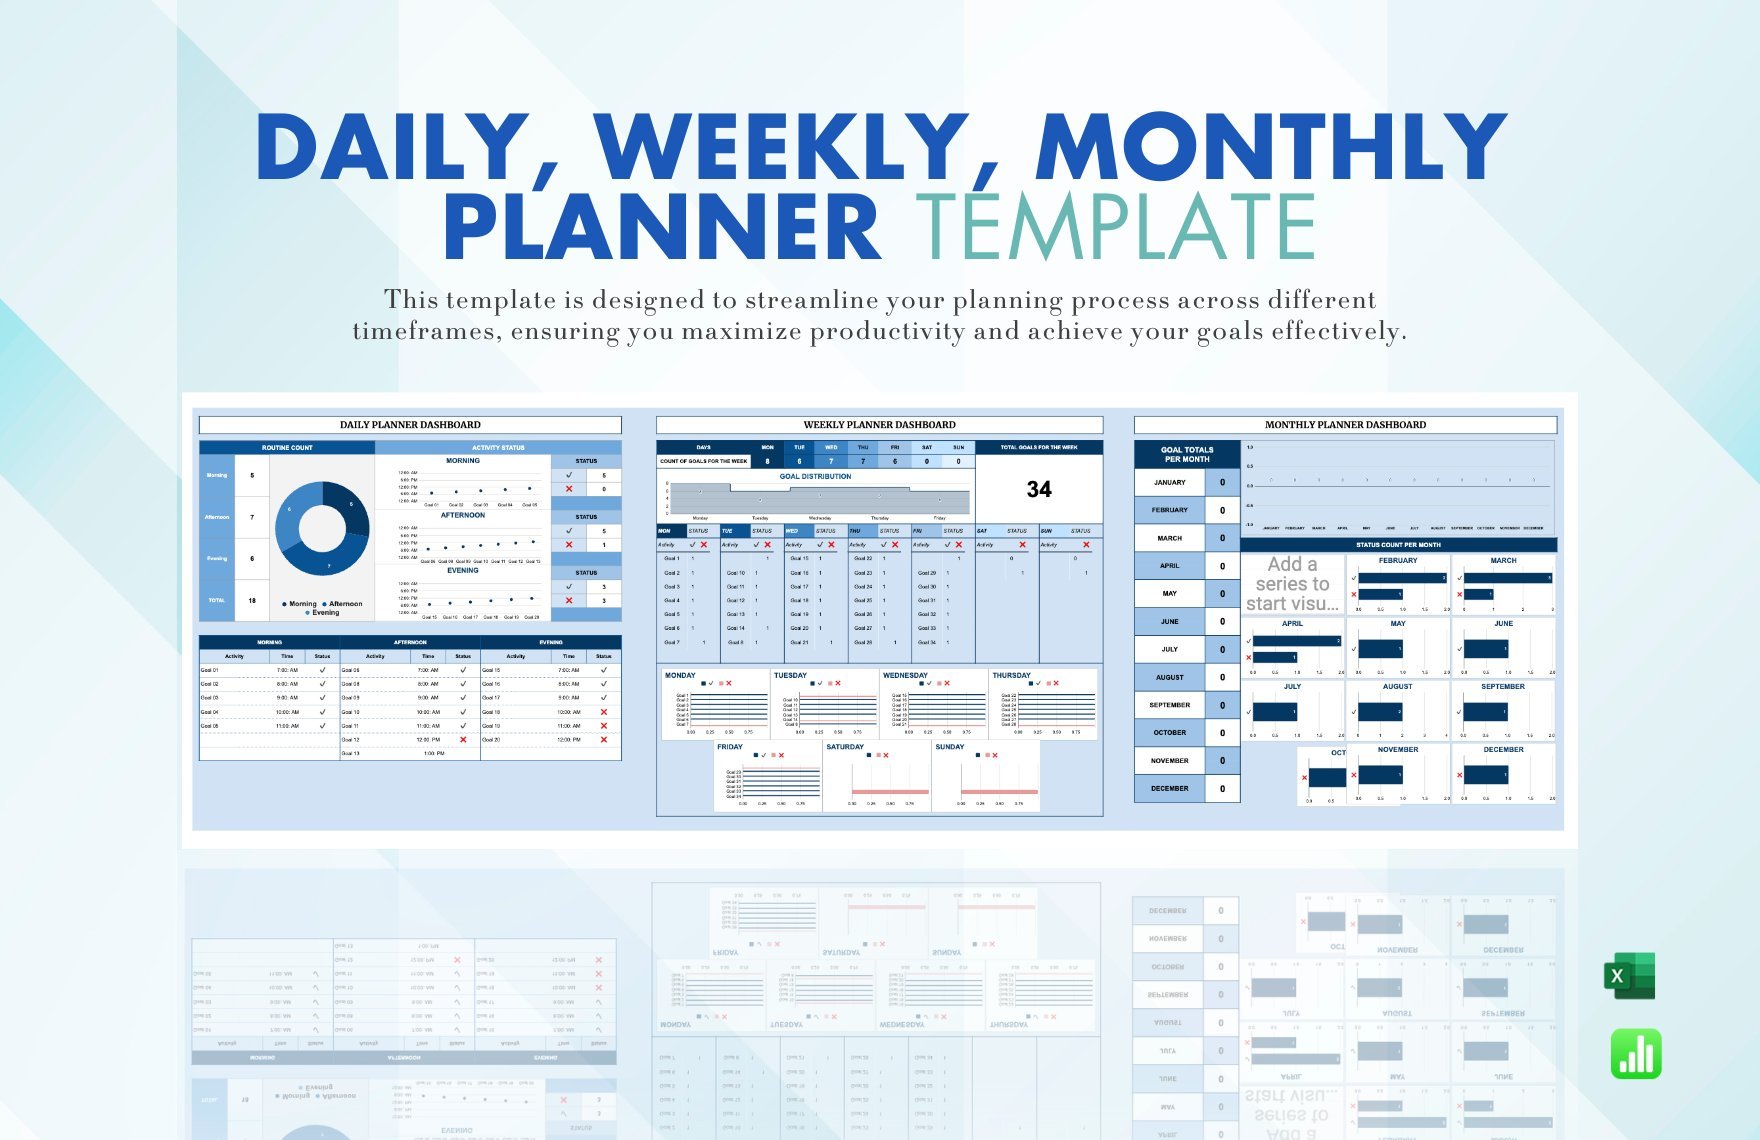 Free Daily, Weekly, Monthly Planner Template in Excel, Google Sheets